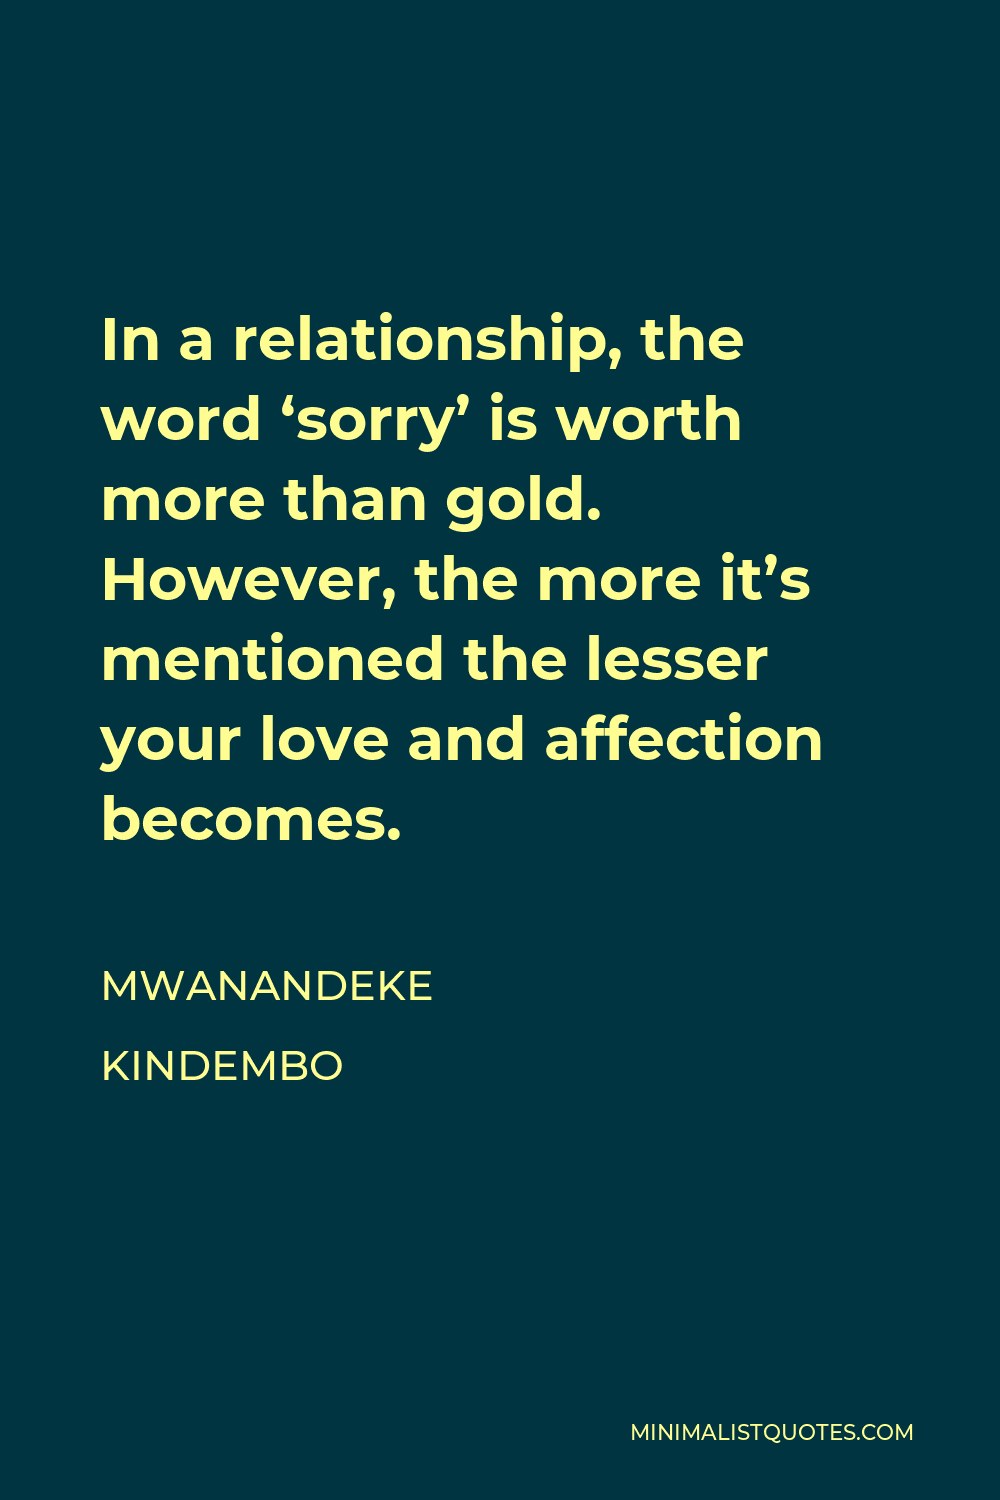 Mwanandeke Kindembo Quote - In a relationship, the word ‘sorry’ is worth more than gold. However, the more it’s mentioned the lesser your love and affection becomes.